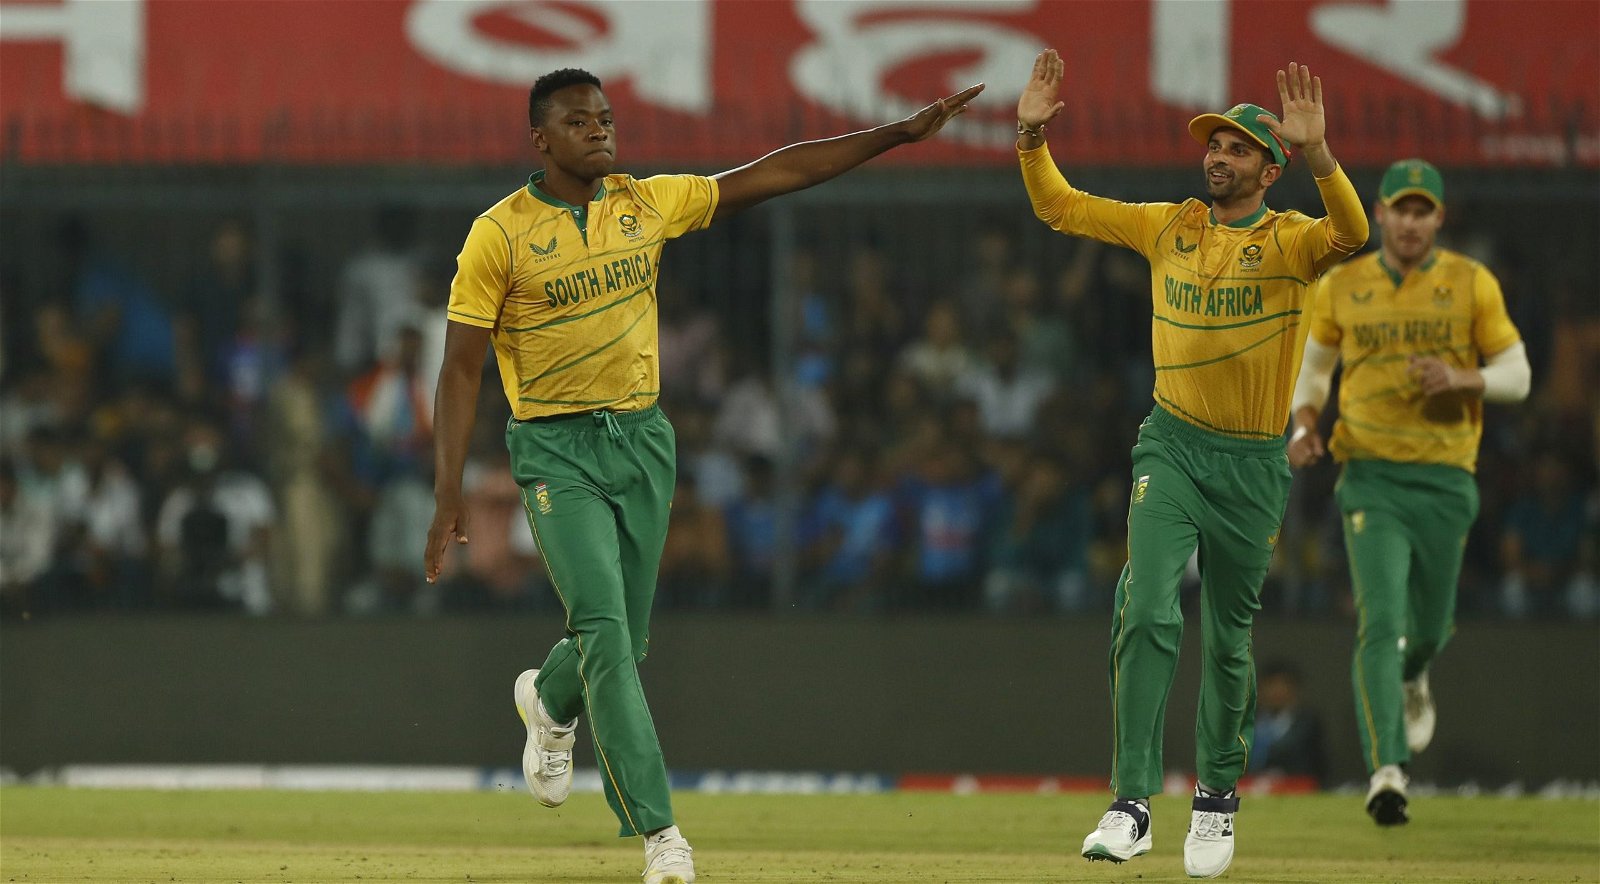 csa t20 challenge live streaming